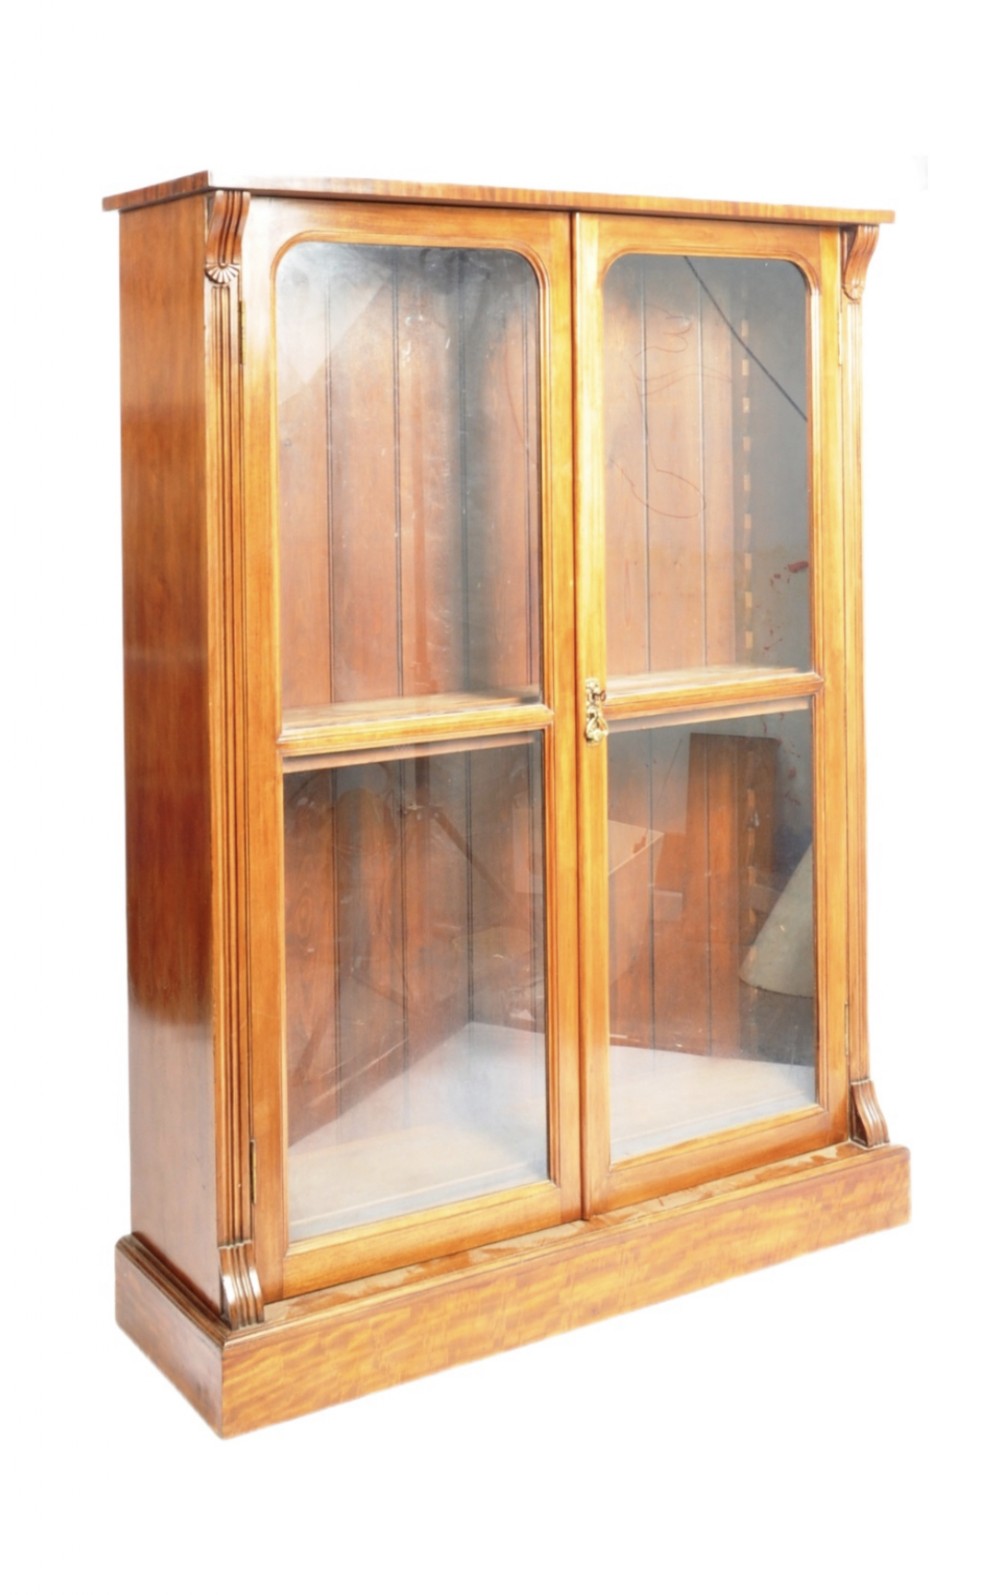 c19th walnut glazed two door library bookcase